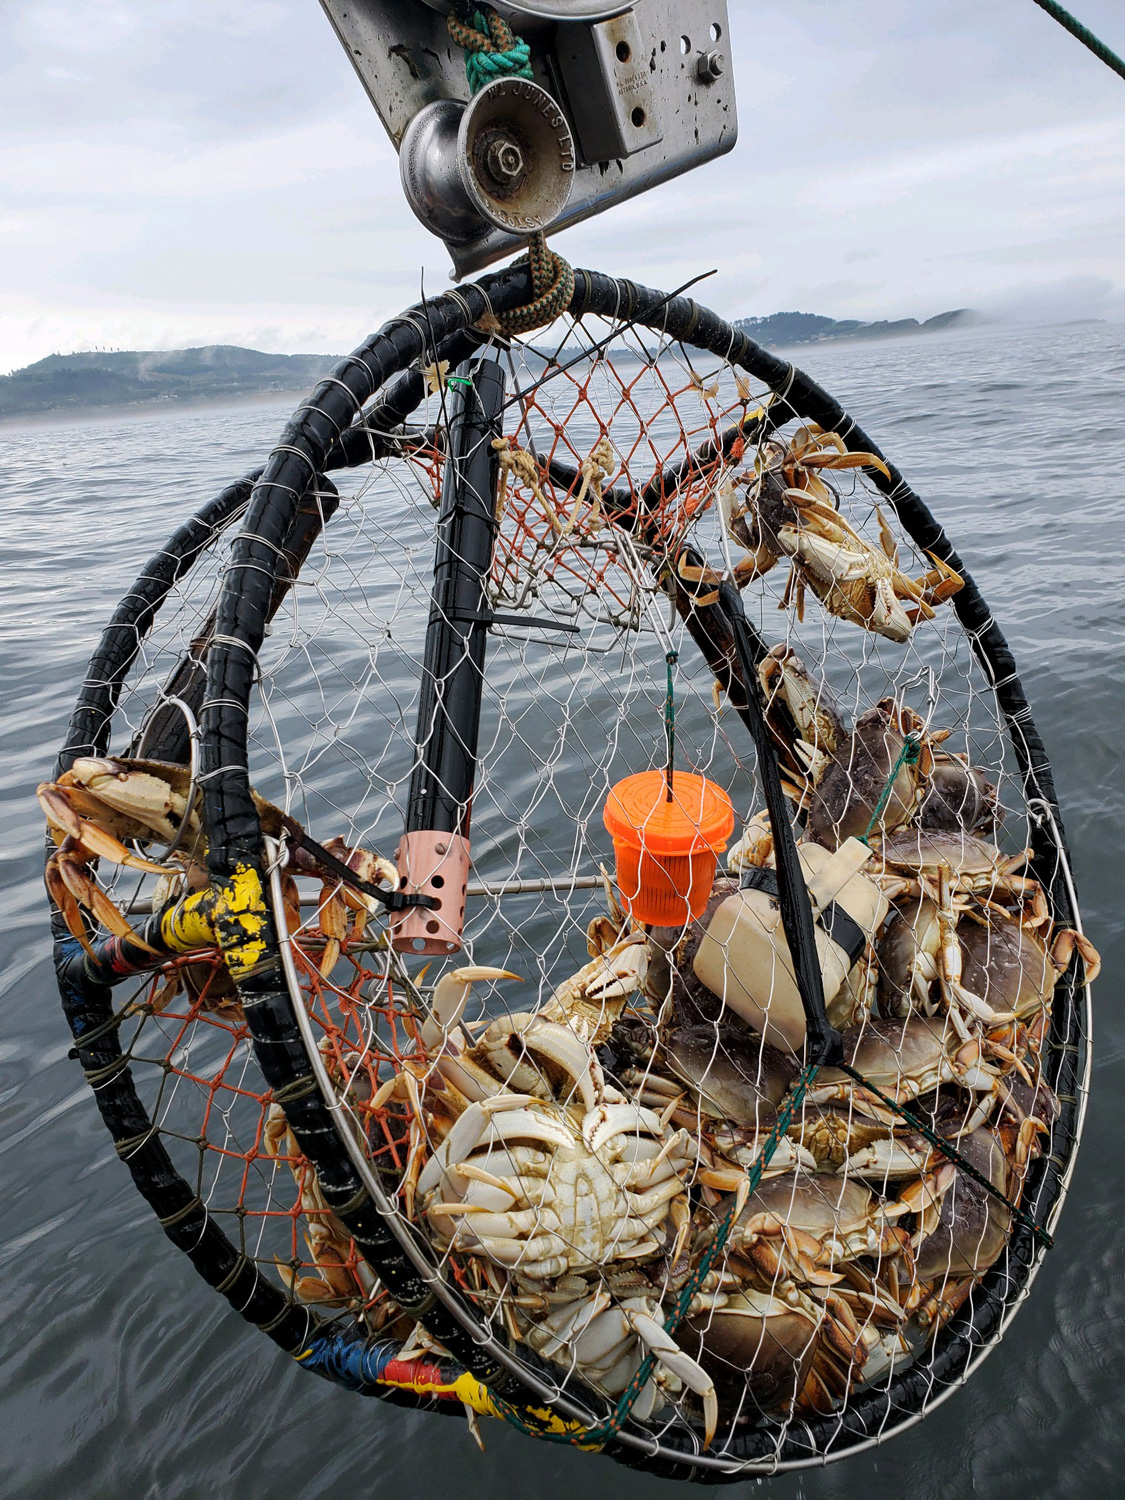 We Are The World: Bait for Crab Traps